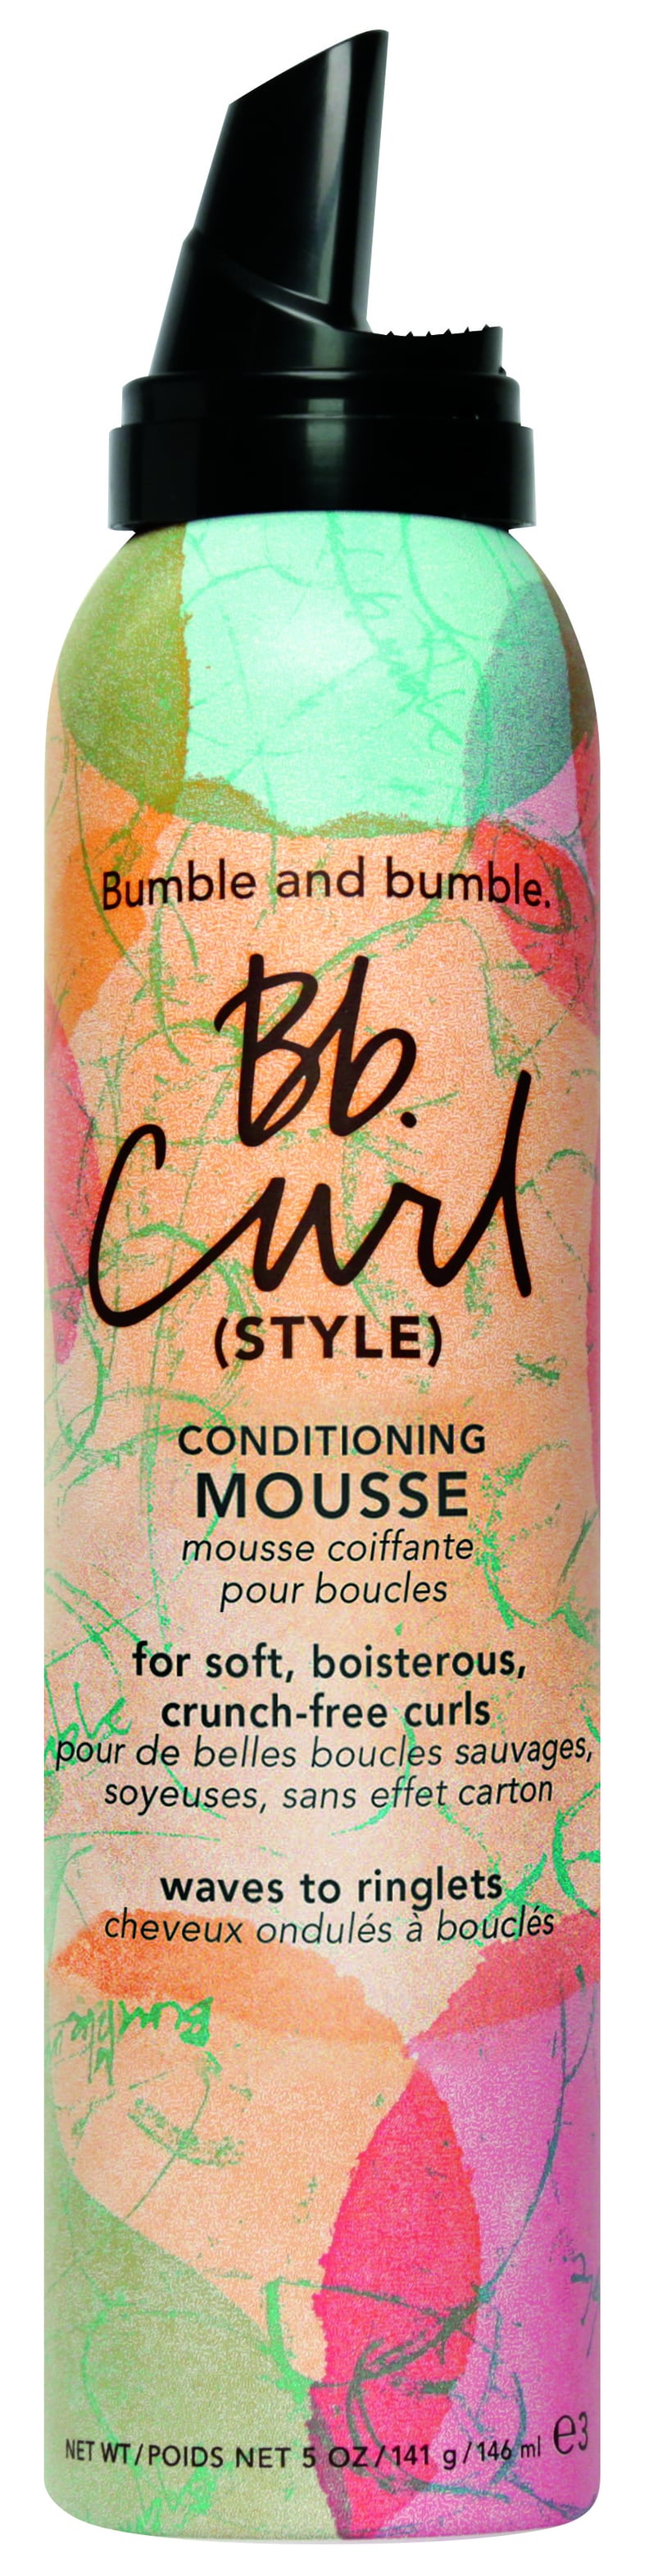 Bumble and Bumble Bb.Curl Conditioning Mousse ($31)